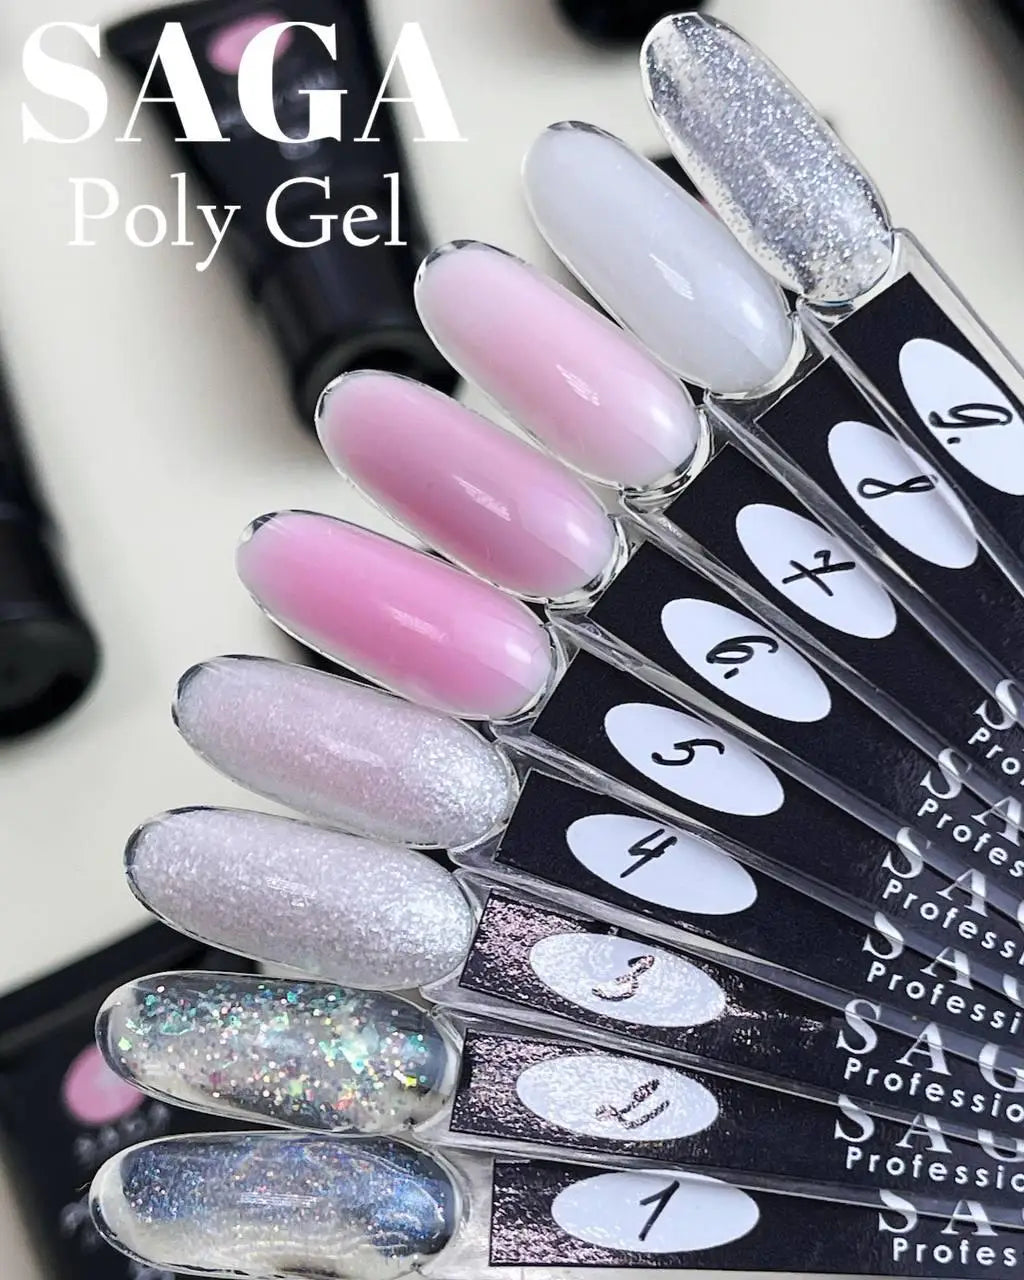 Poly-gel Saga Exclusive No. 8, 30 ml (milky with shimmer)